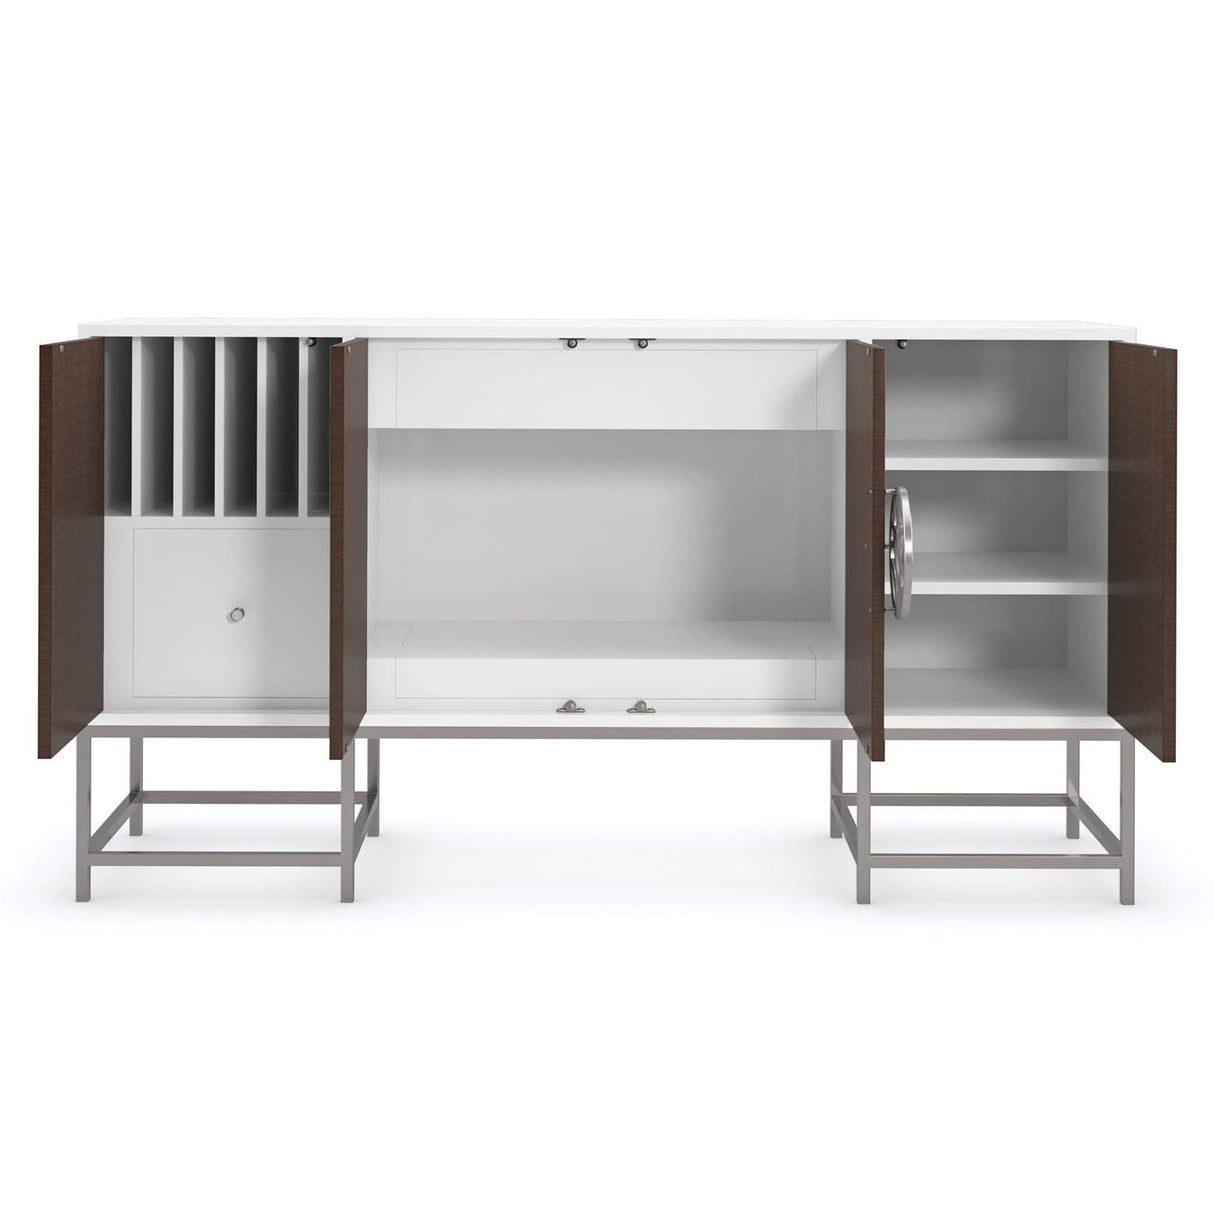 Caracole A Touch Of Class Buffet Furniture caracole-CLA-421-682 662896038057